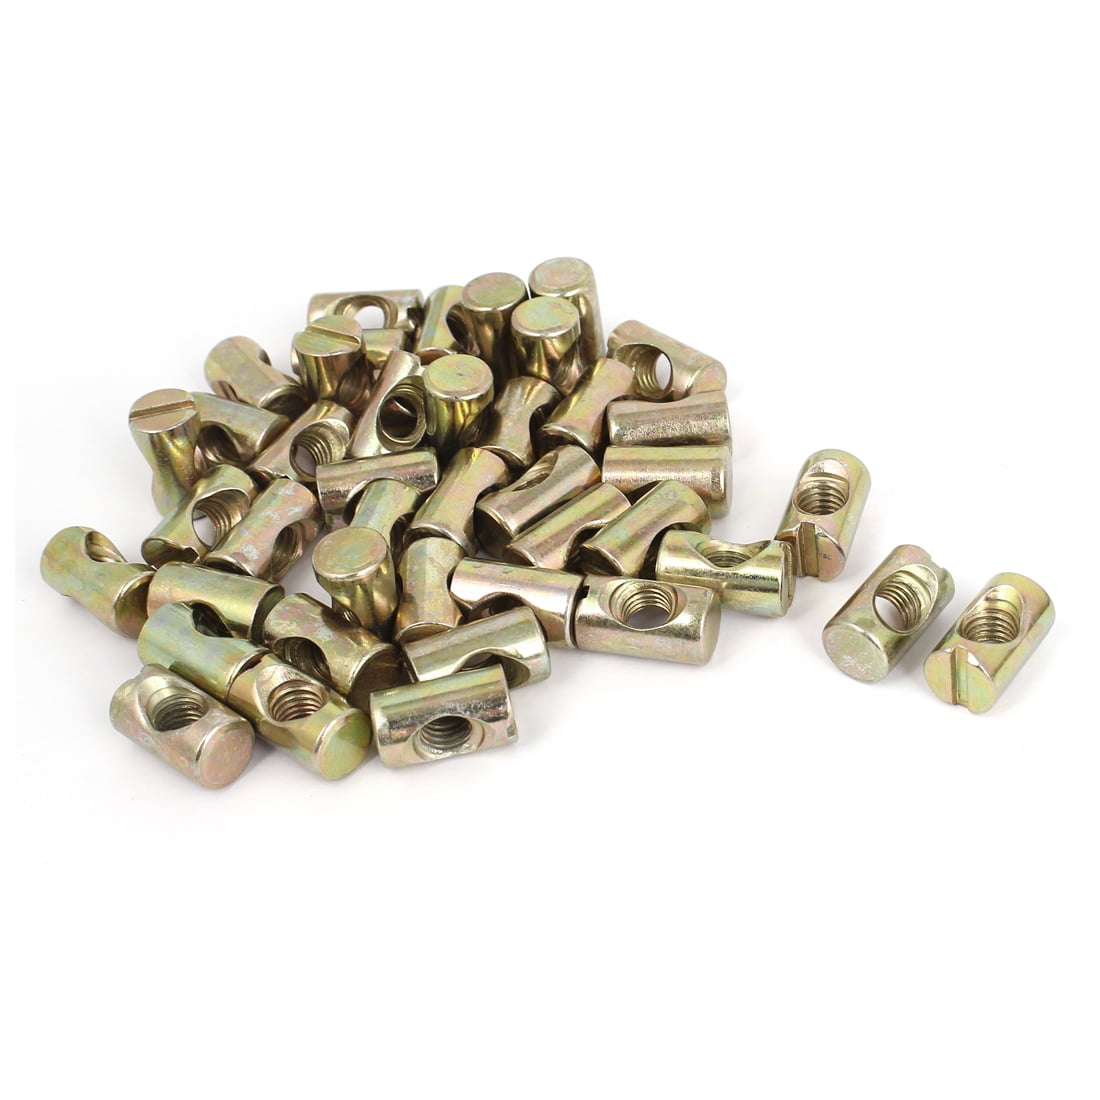 Beds M6 x 15mm 50 Pcs M6 Barrel Nuts Cross Dowels Slotted Nuts for Furniture Cots Crib and Chairs